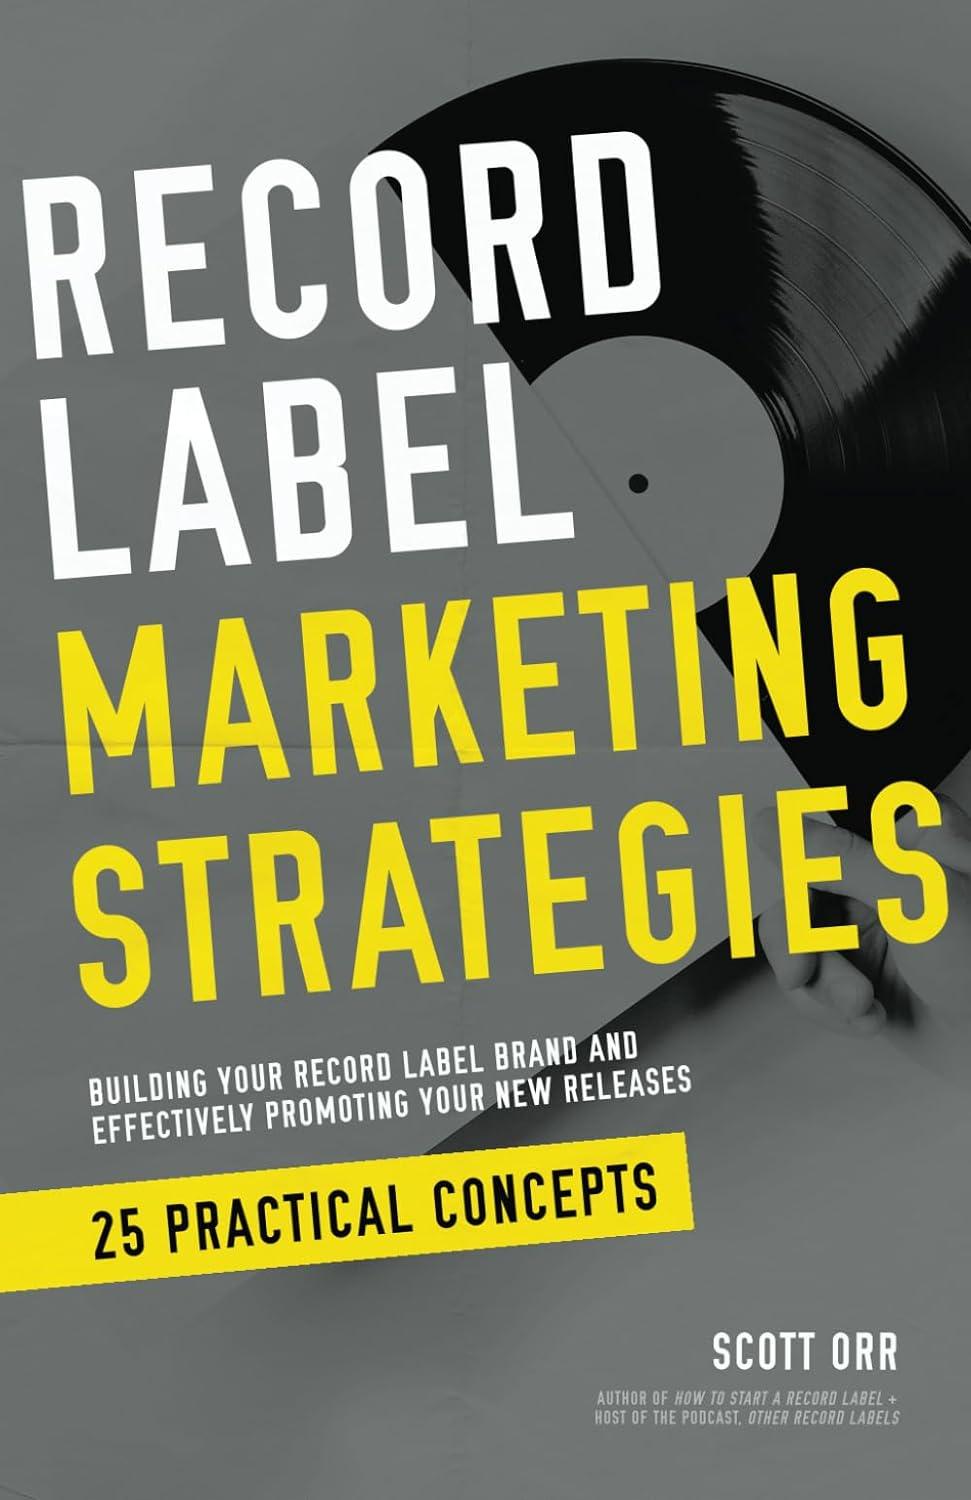 record label marketing strategies  building your record label brand and effectively promoting your new